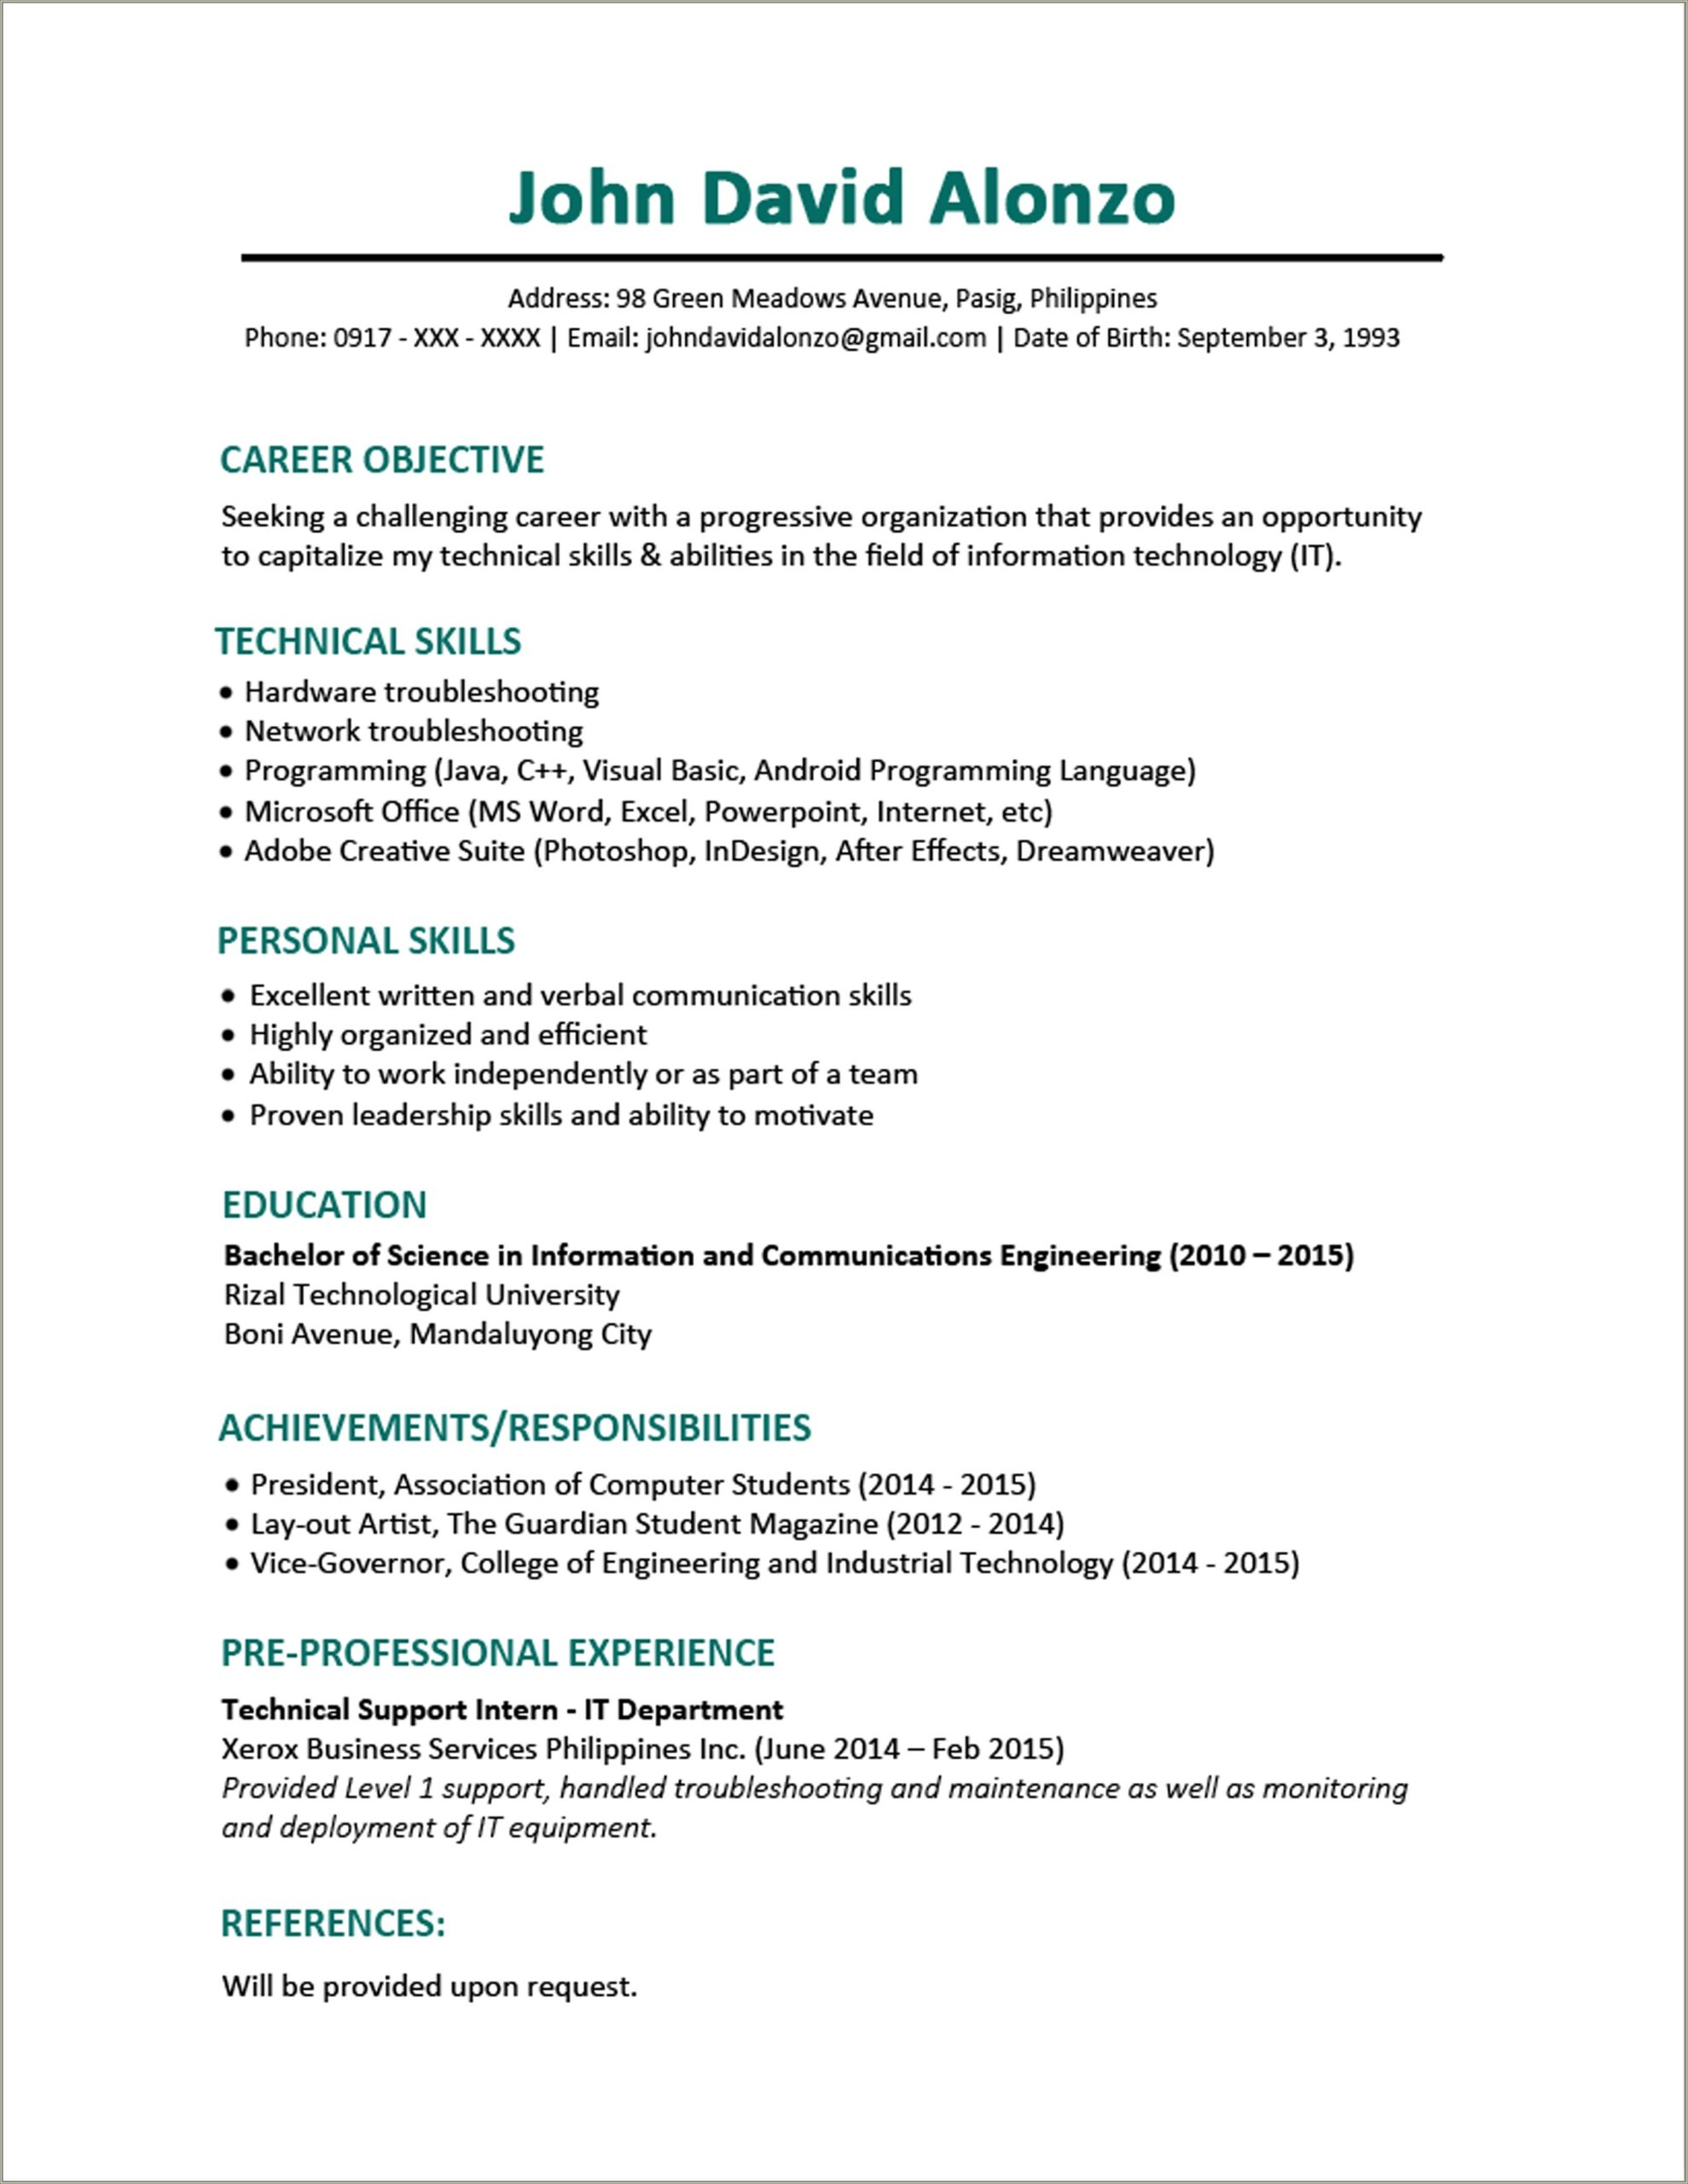 Resume Objective Sample For It Professional